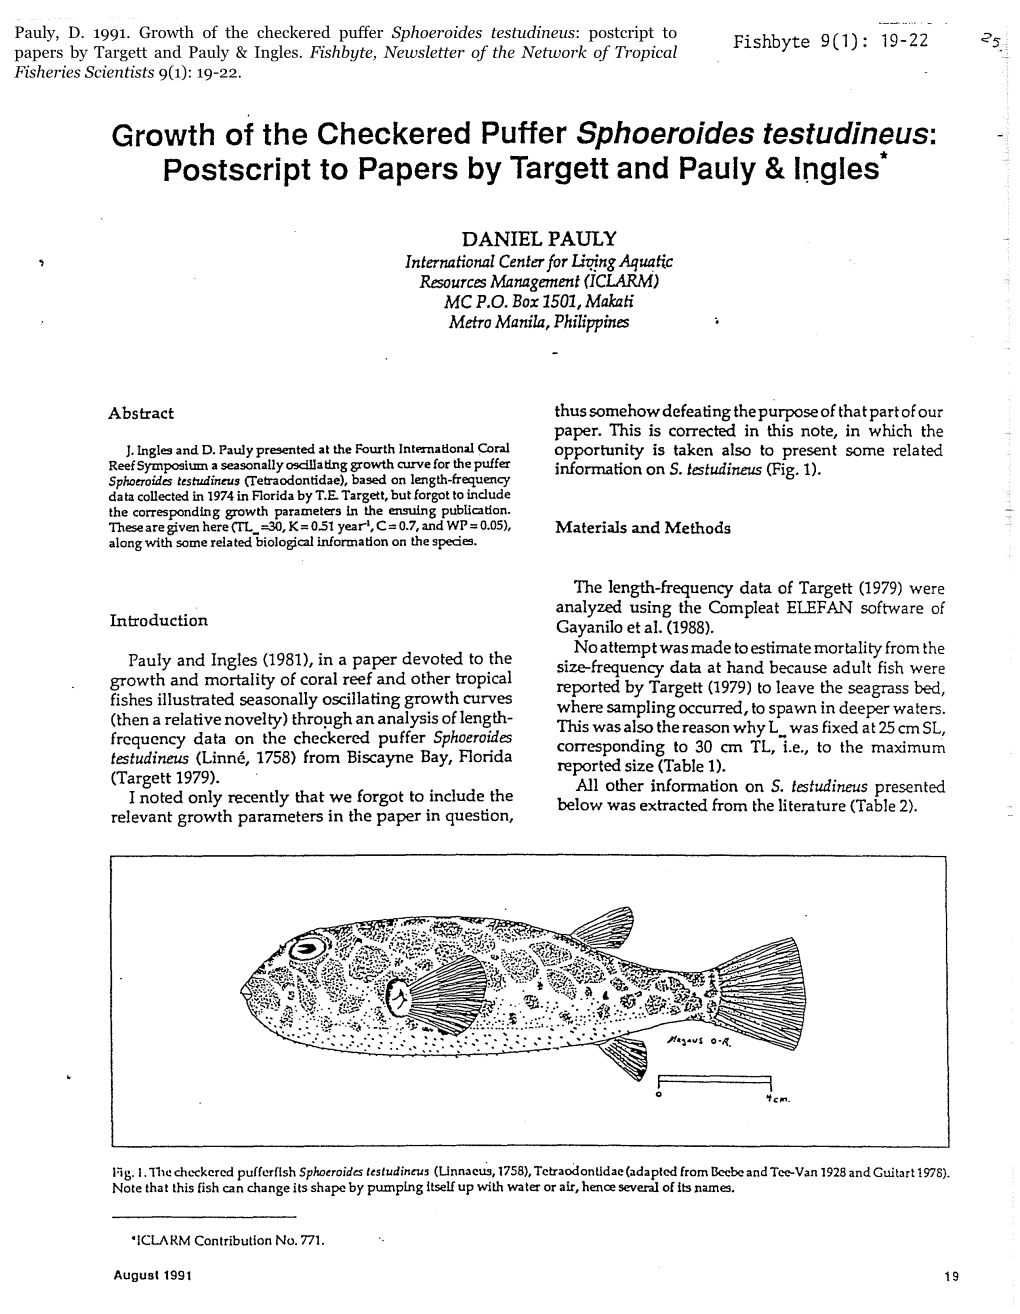 Growth of the Checkered Puffer Sphoeroides Testudineus: Postscript to Papers by Targett and Pauly &Logles*